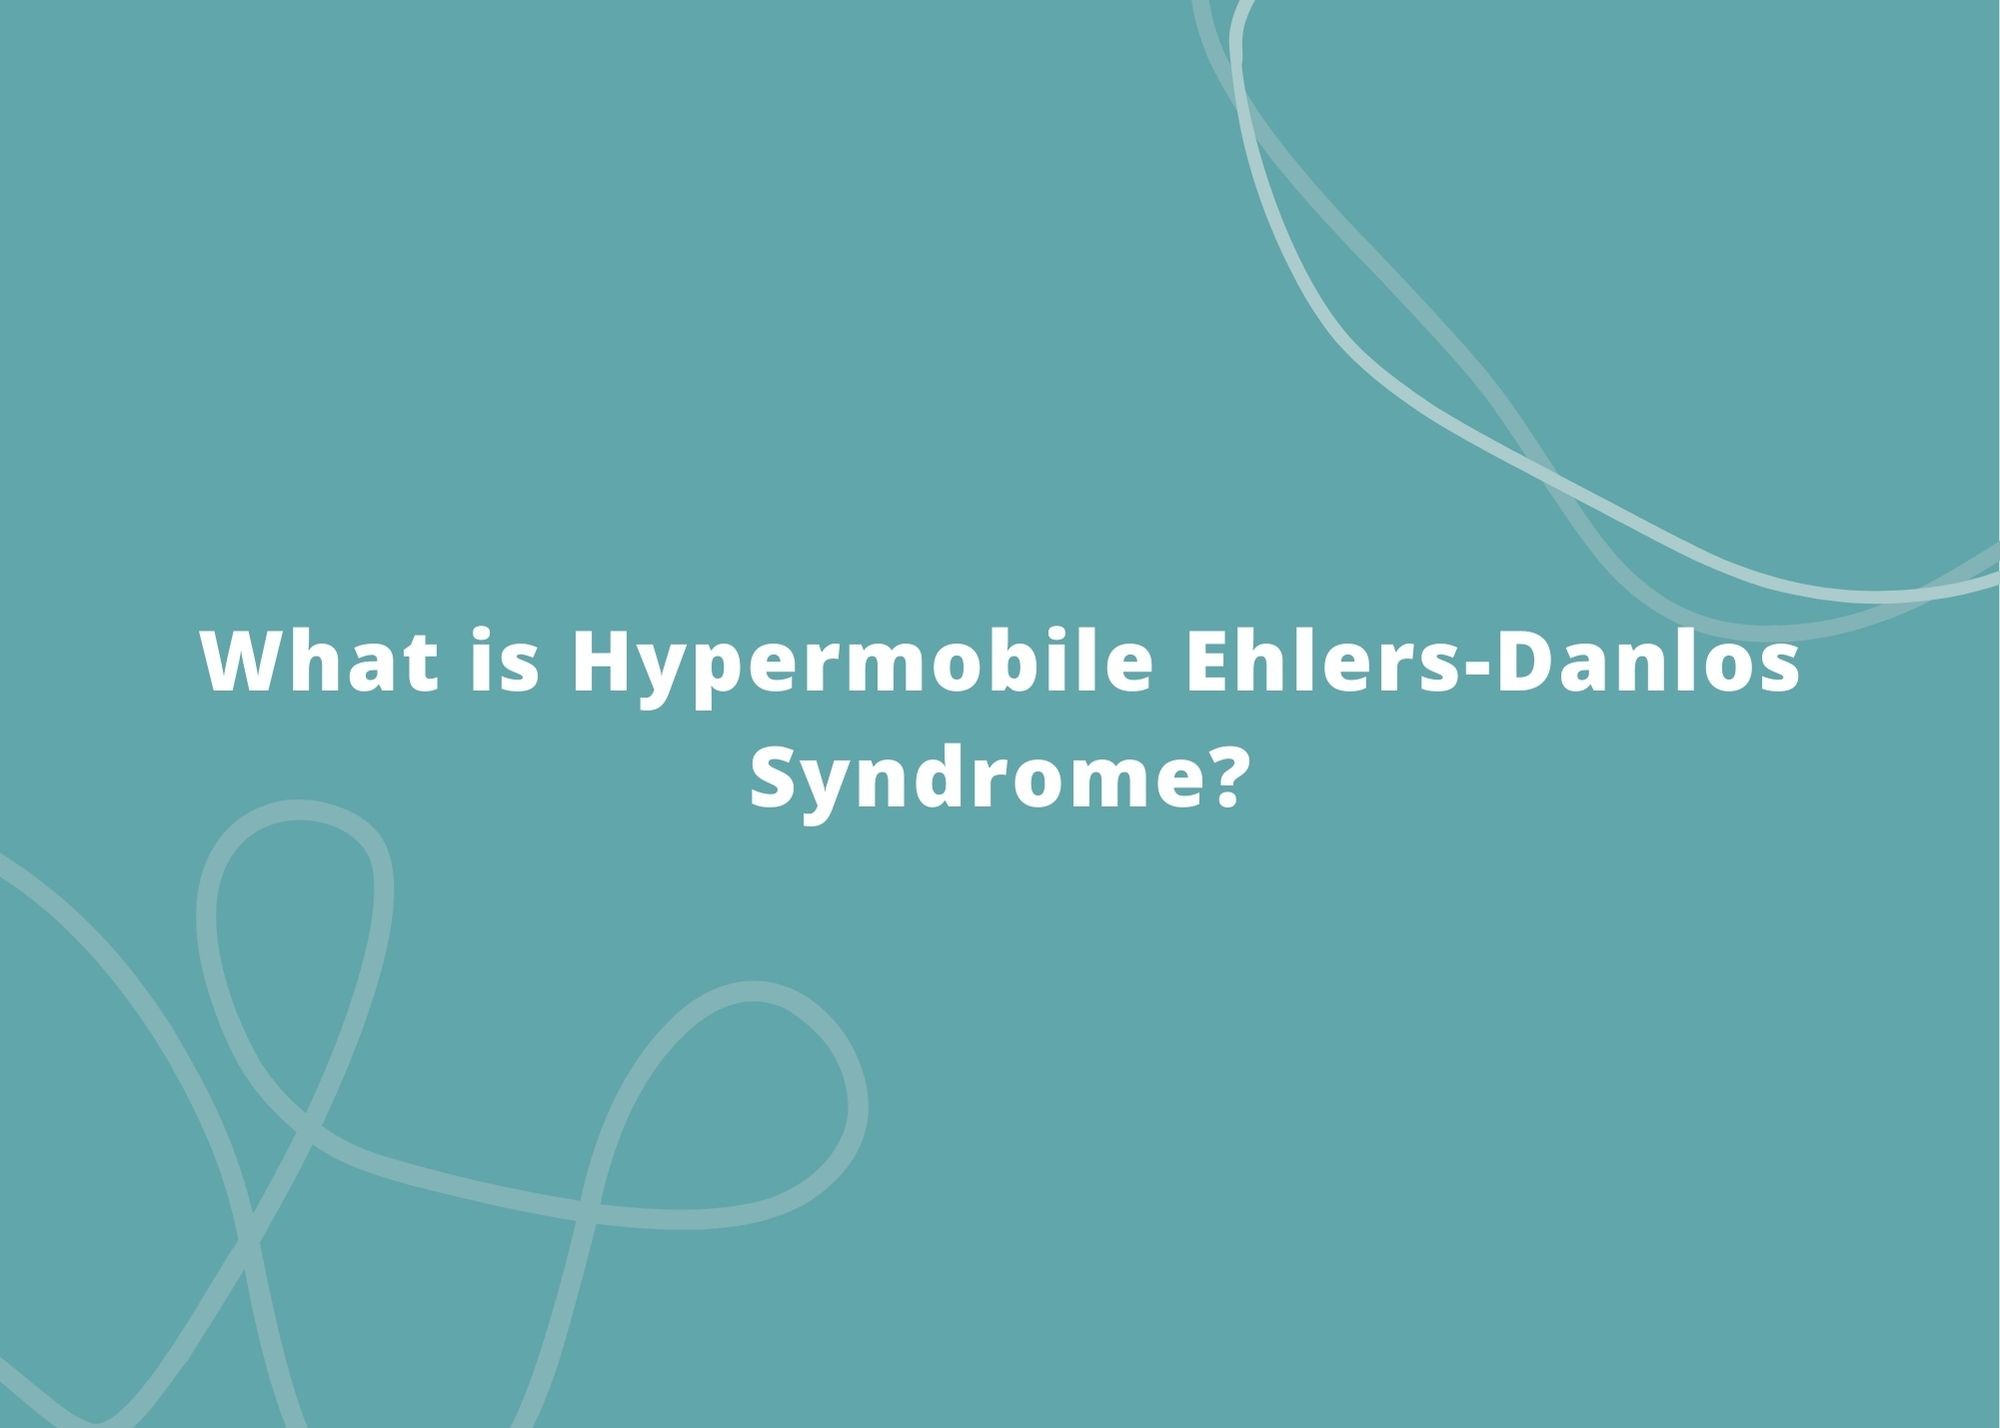 hypermobile ehlers danlos syndrome